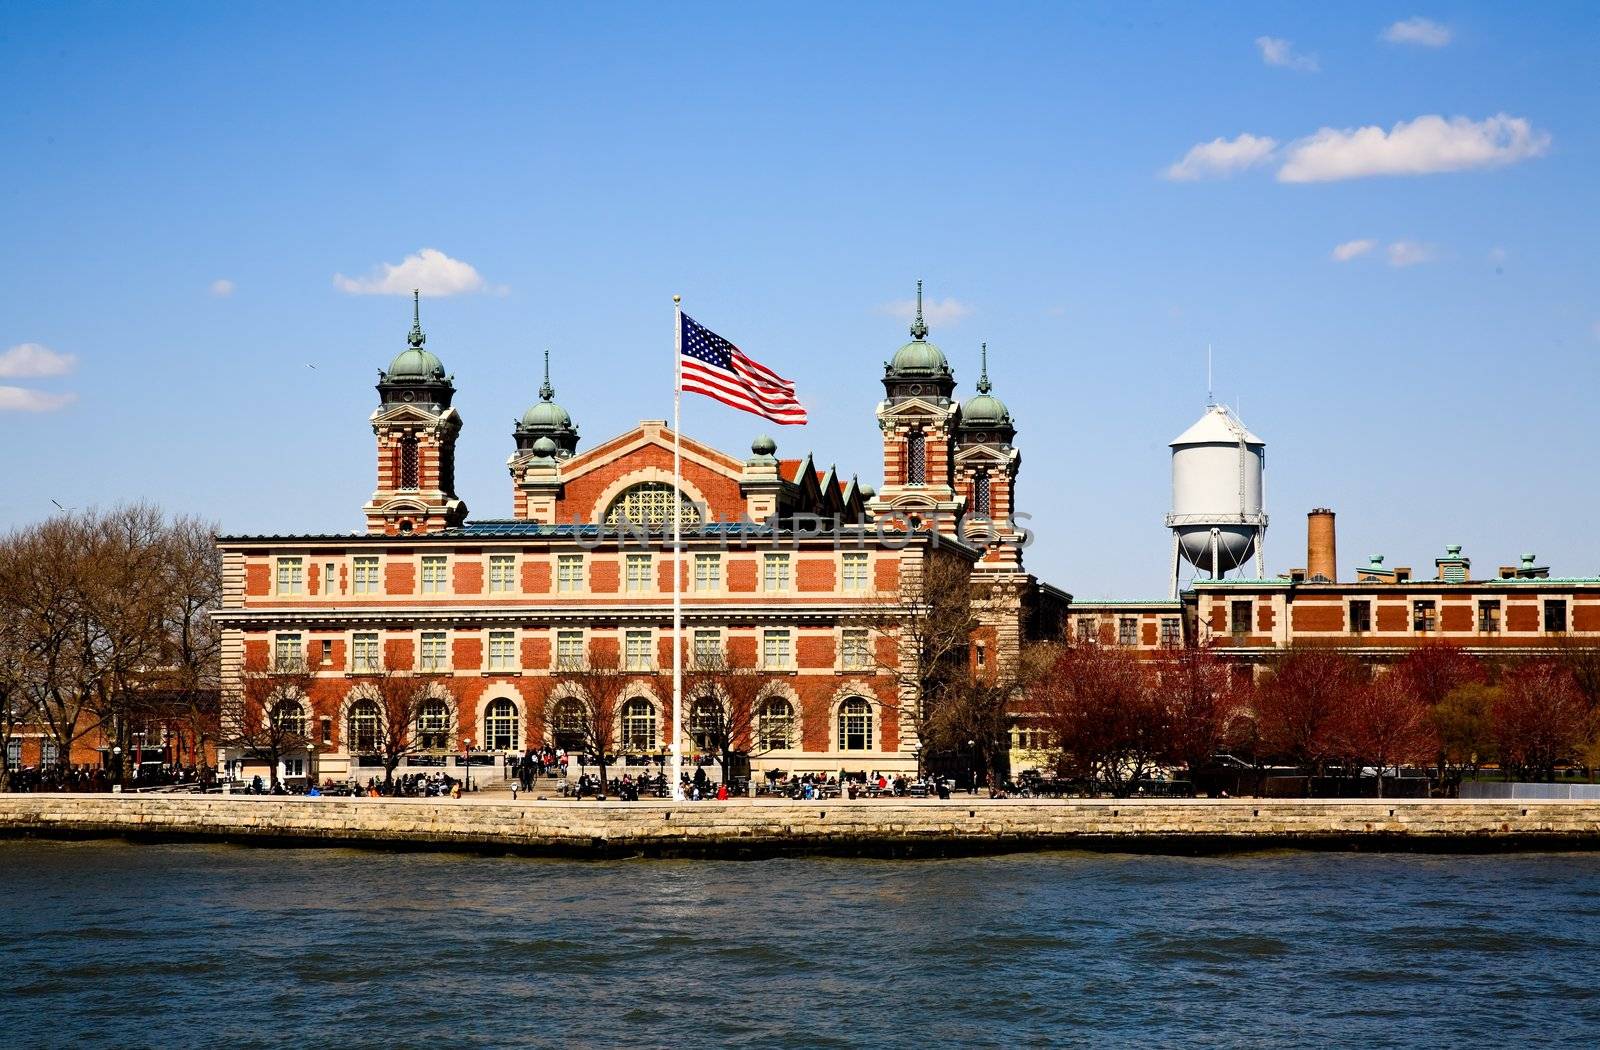 The main immigration building on Ellis Island by gary718